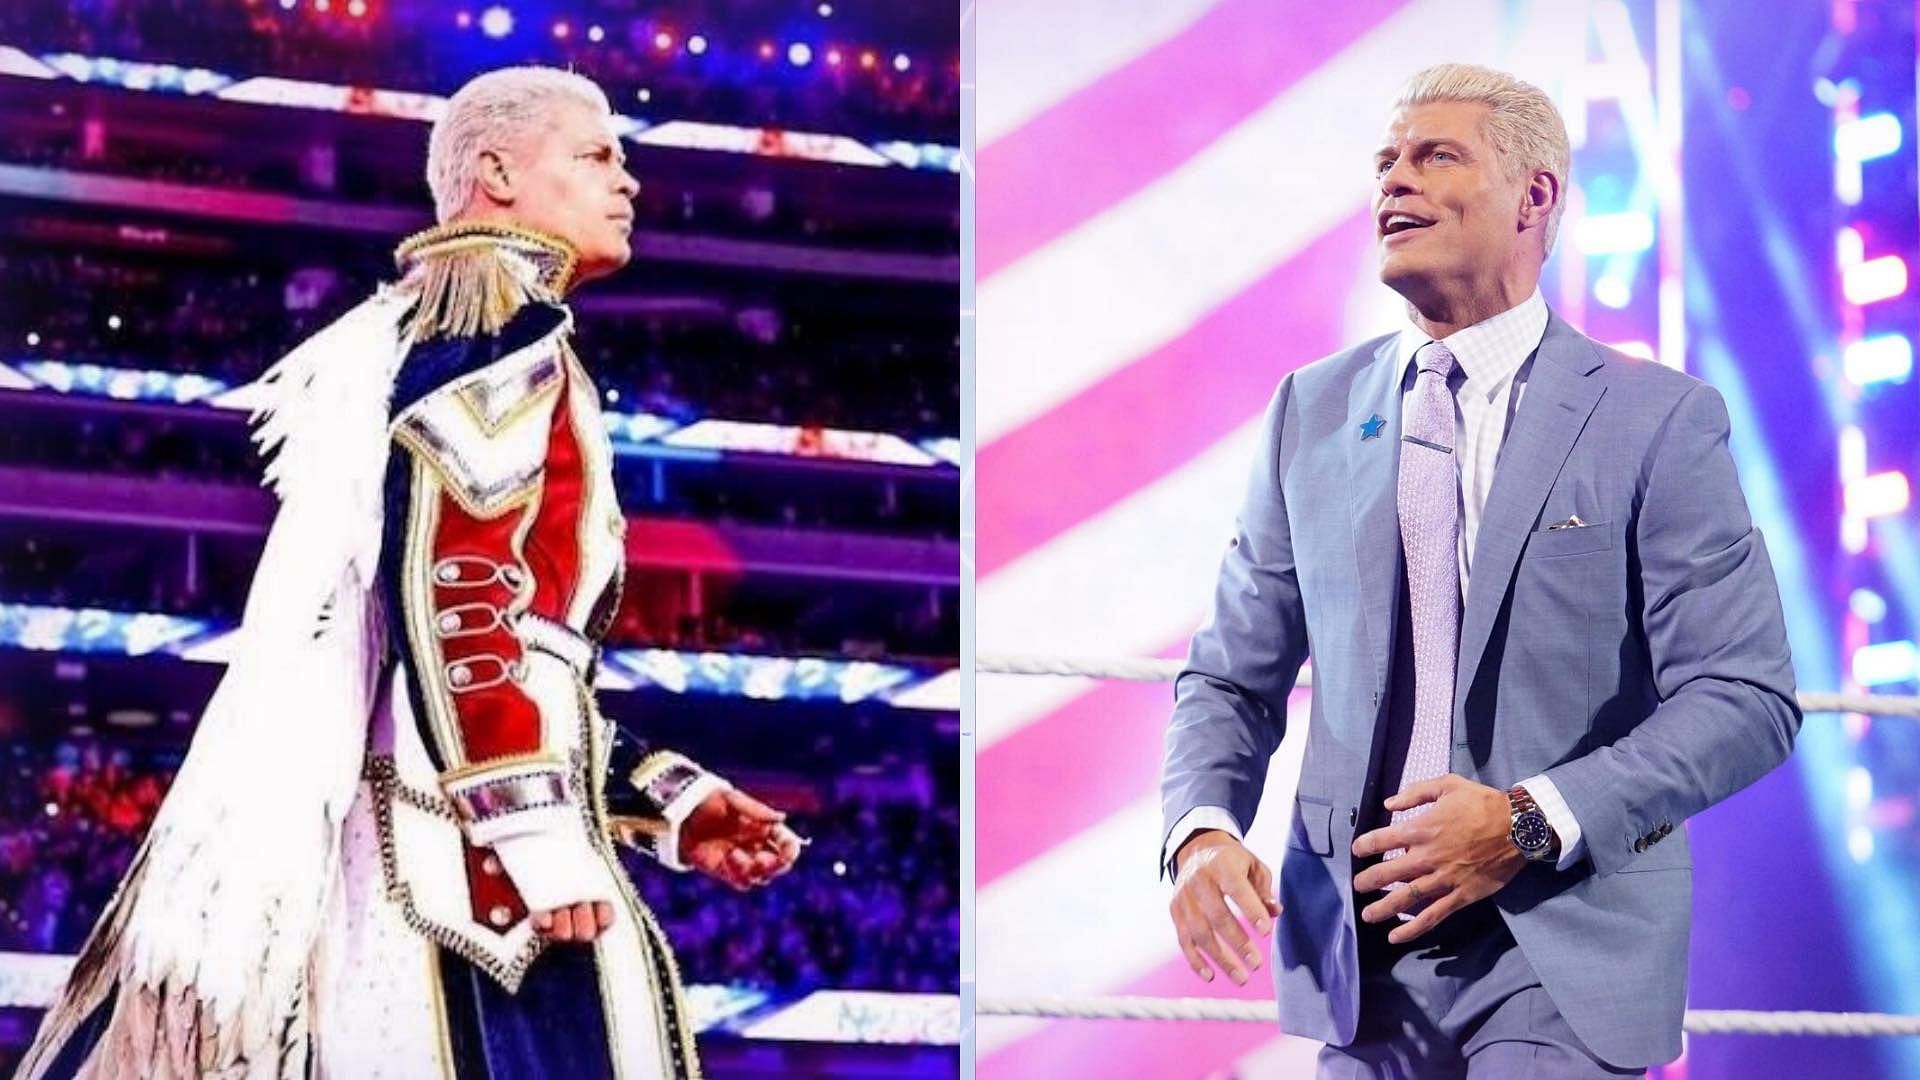 Cody Rhodes is set to appear on MizTV on WWE RAW